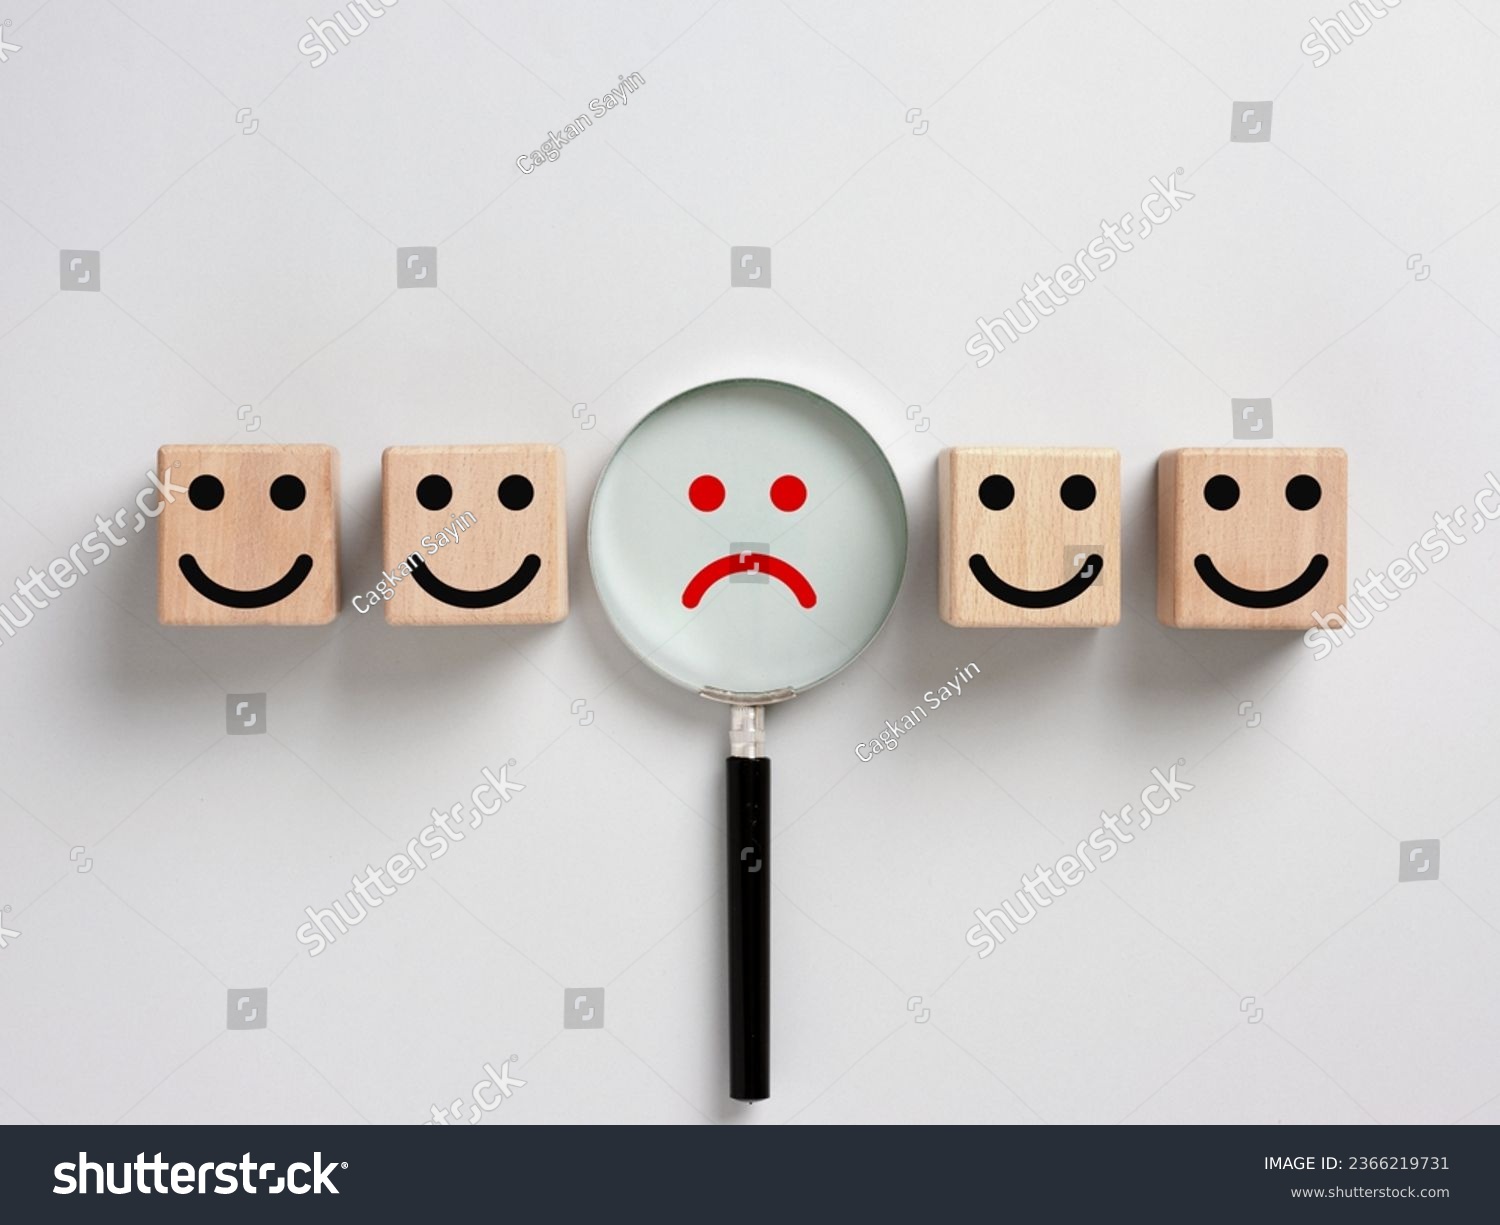 Customer dissatisfaction or unhappy client or user. Customer satisfaction. Service or product rating. To find and analyze the dissatisfied consumers. #2366219731